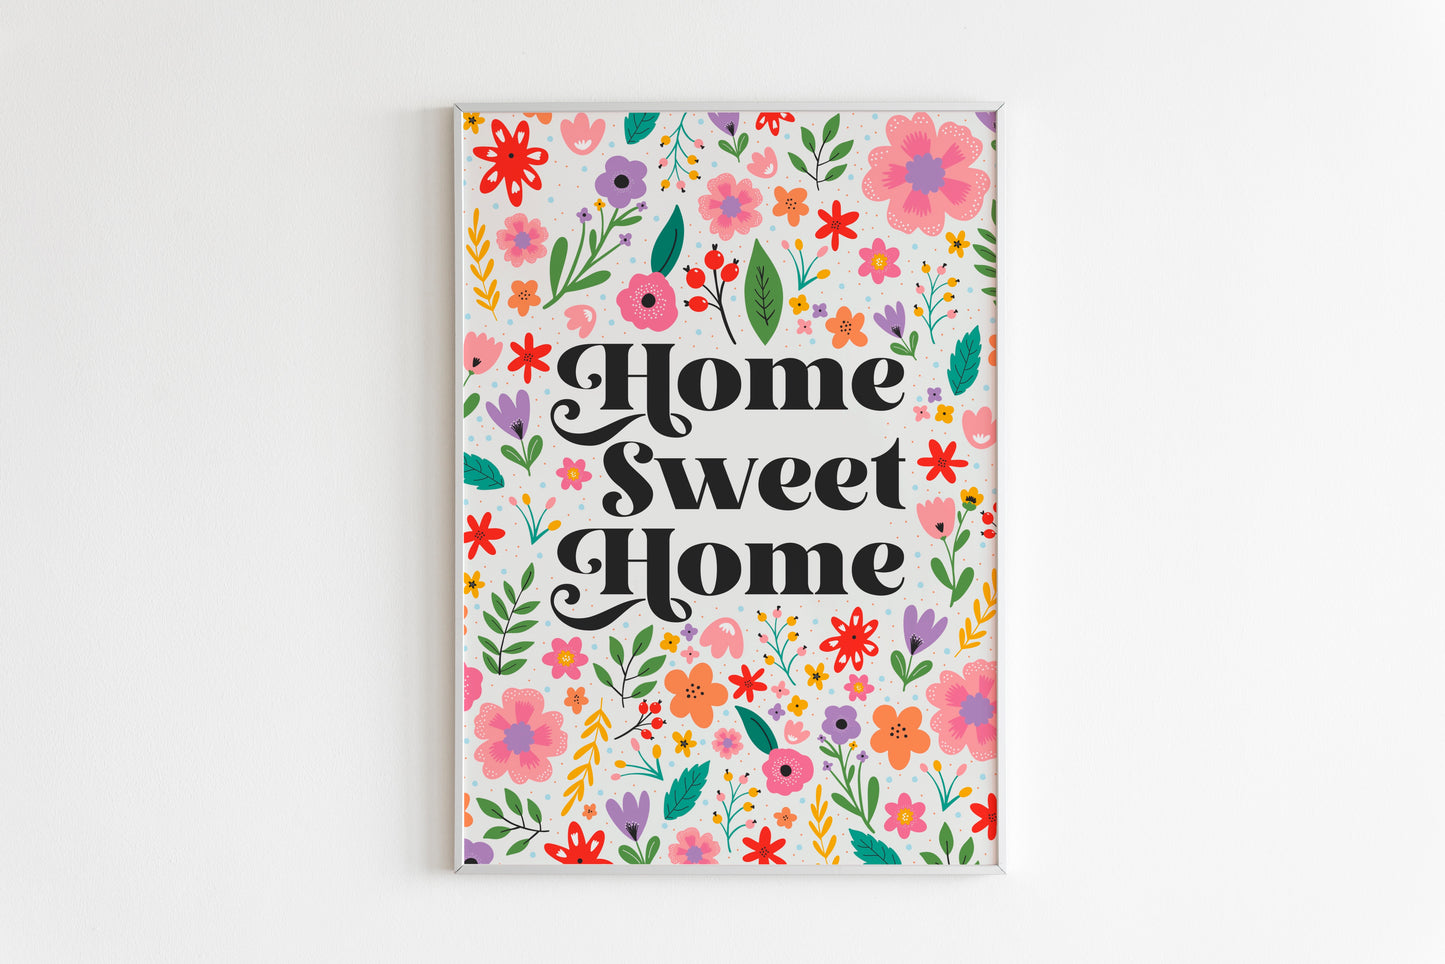 Home Sweet Home Print in White